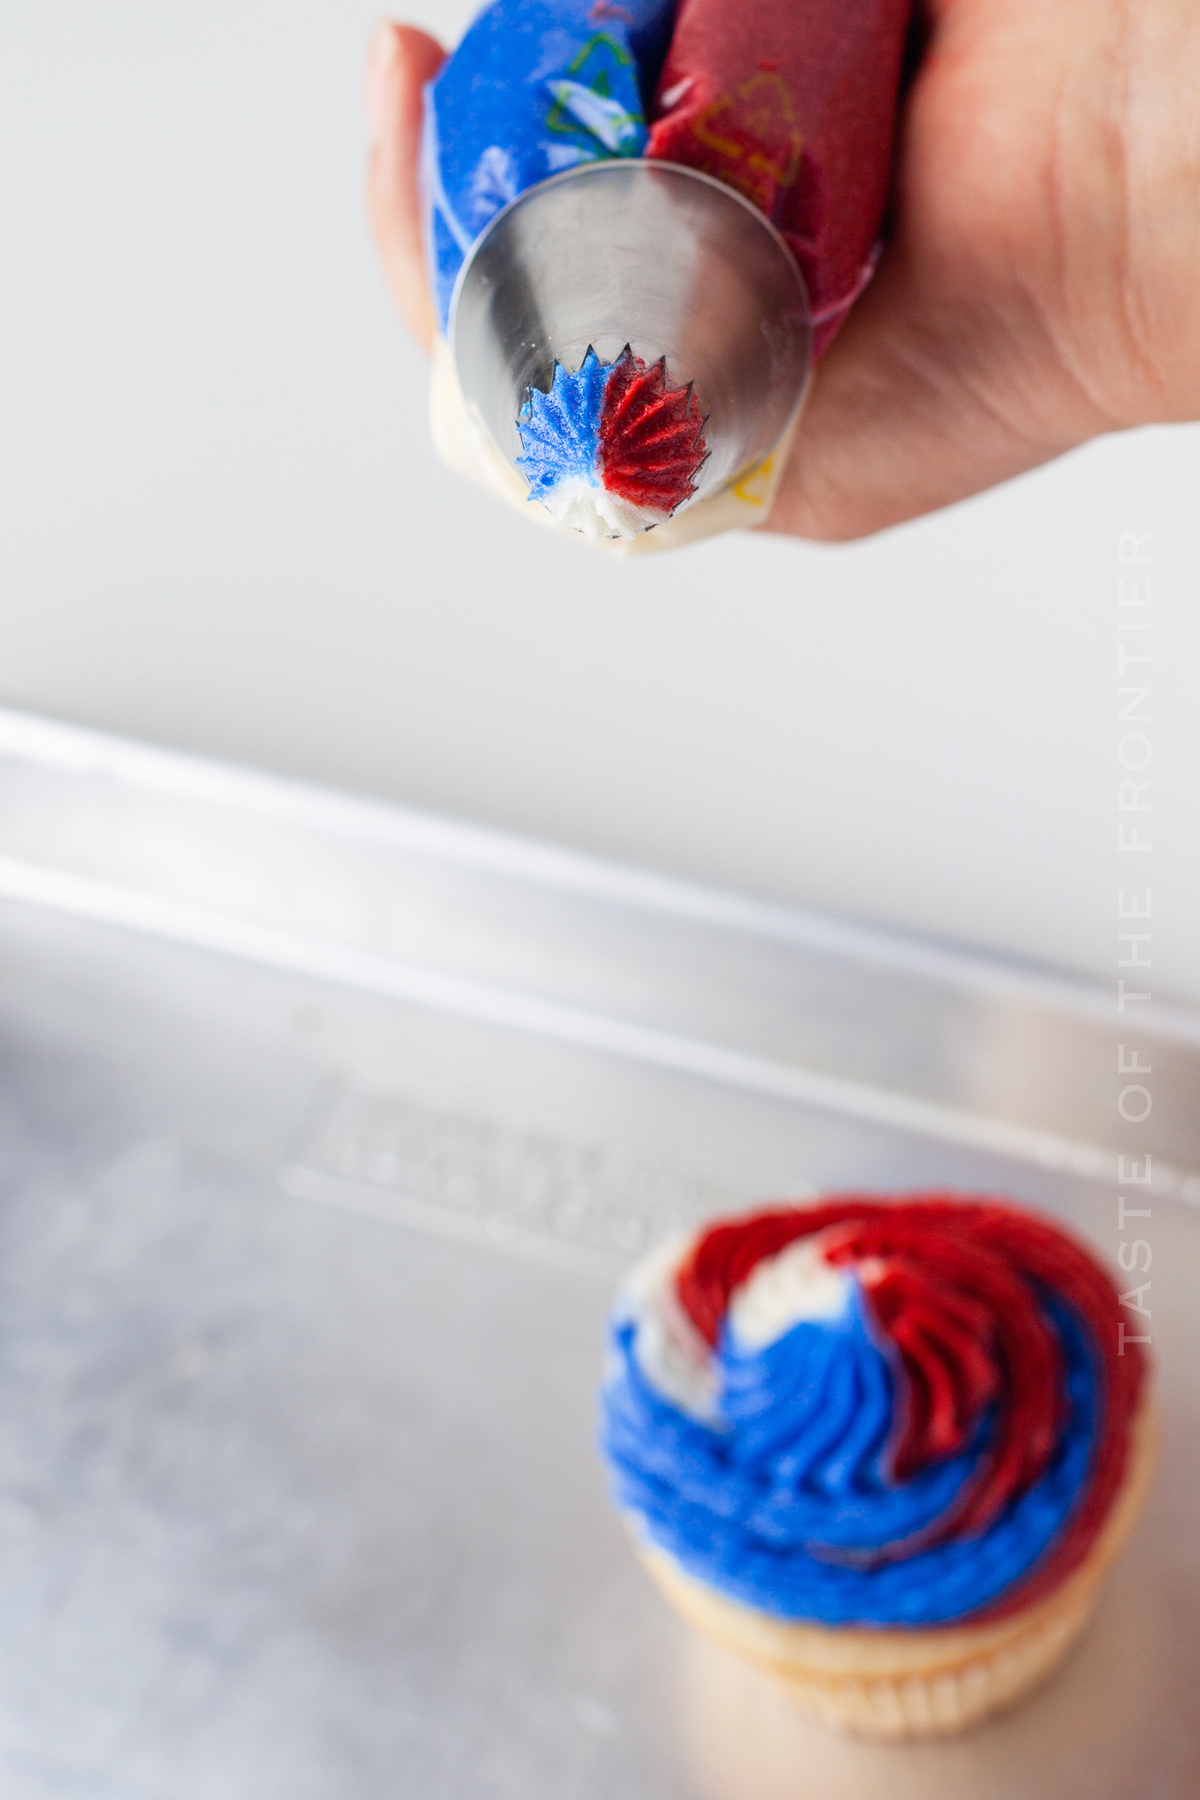 Piping Swirled Frosting Colors